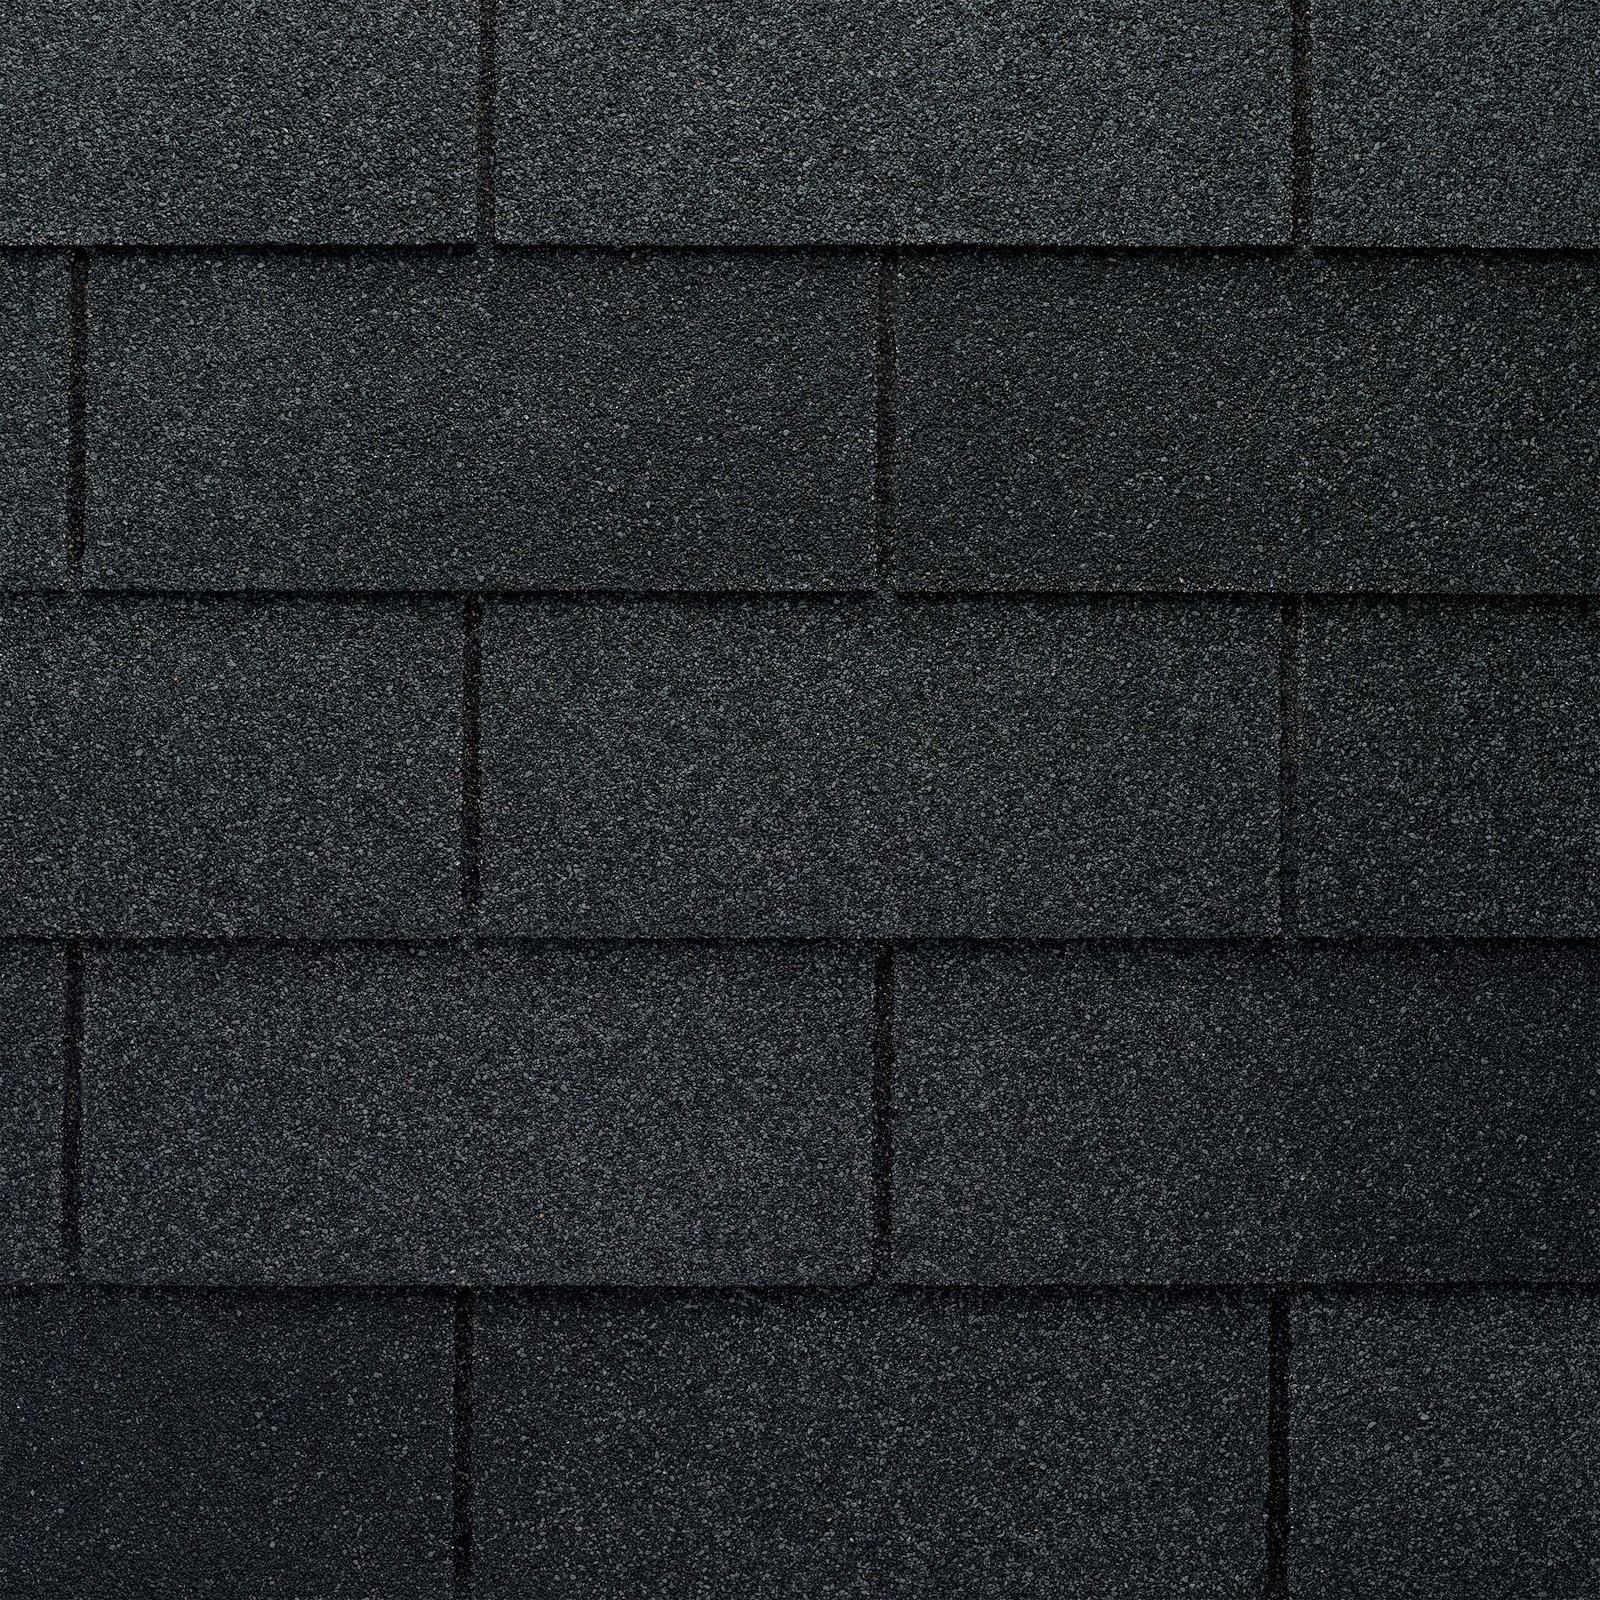 Close up photo of GAF's Marquis WeatherMax Charcoal shingle swatch